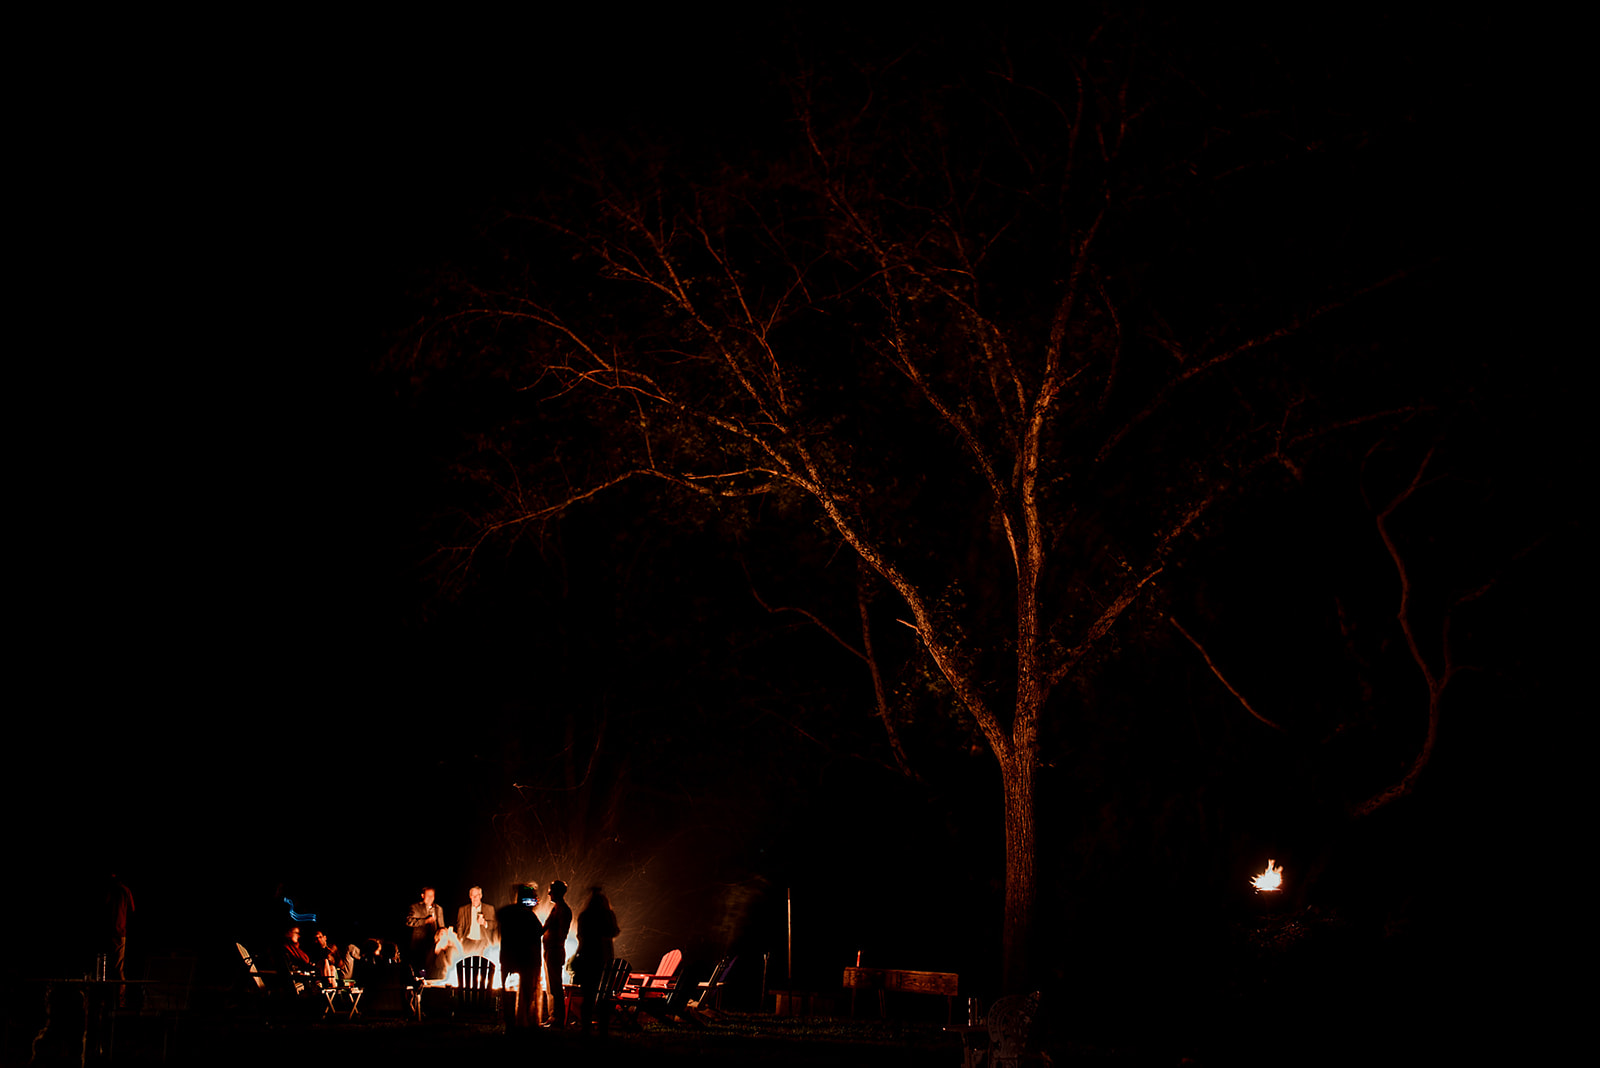 Far away view of after party bon fire with guests sitting in Adirondack chairs roasting smores.